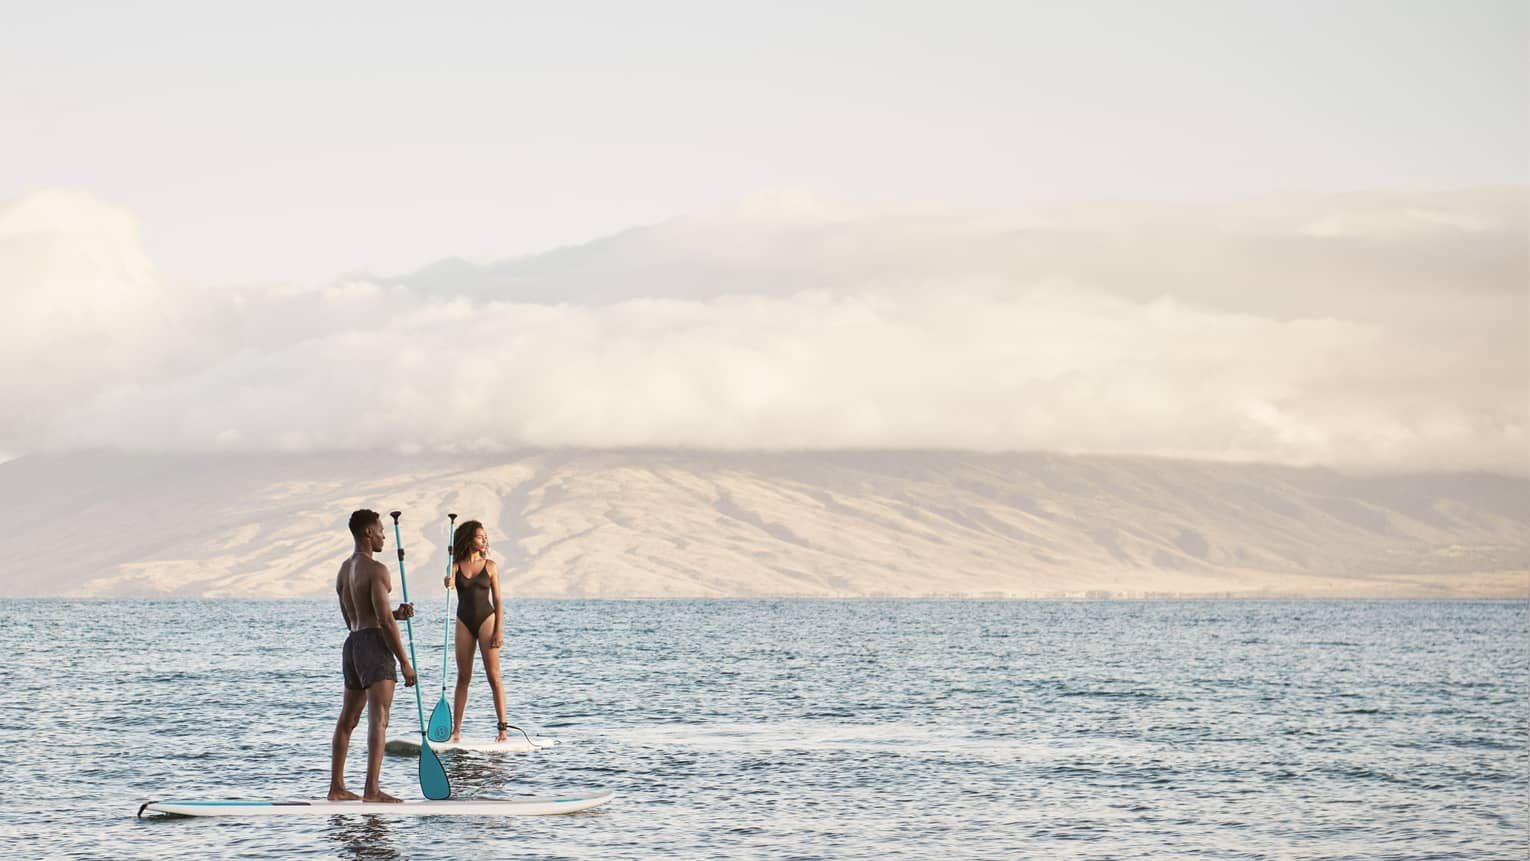 Man and woman stand on SUP paddleboards in the ocean in Maui